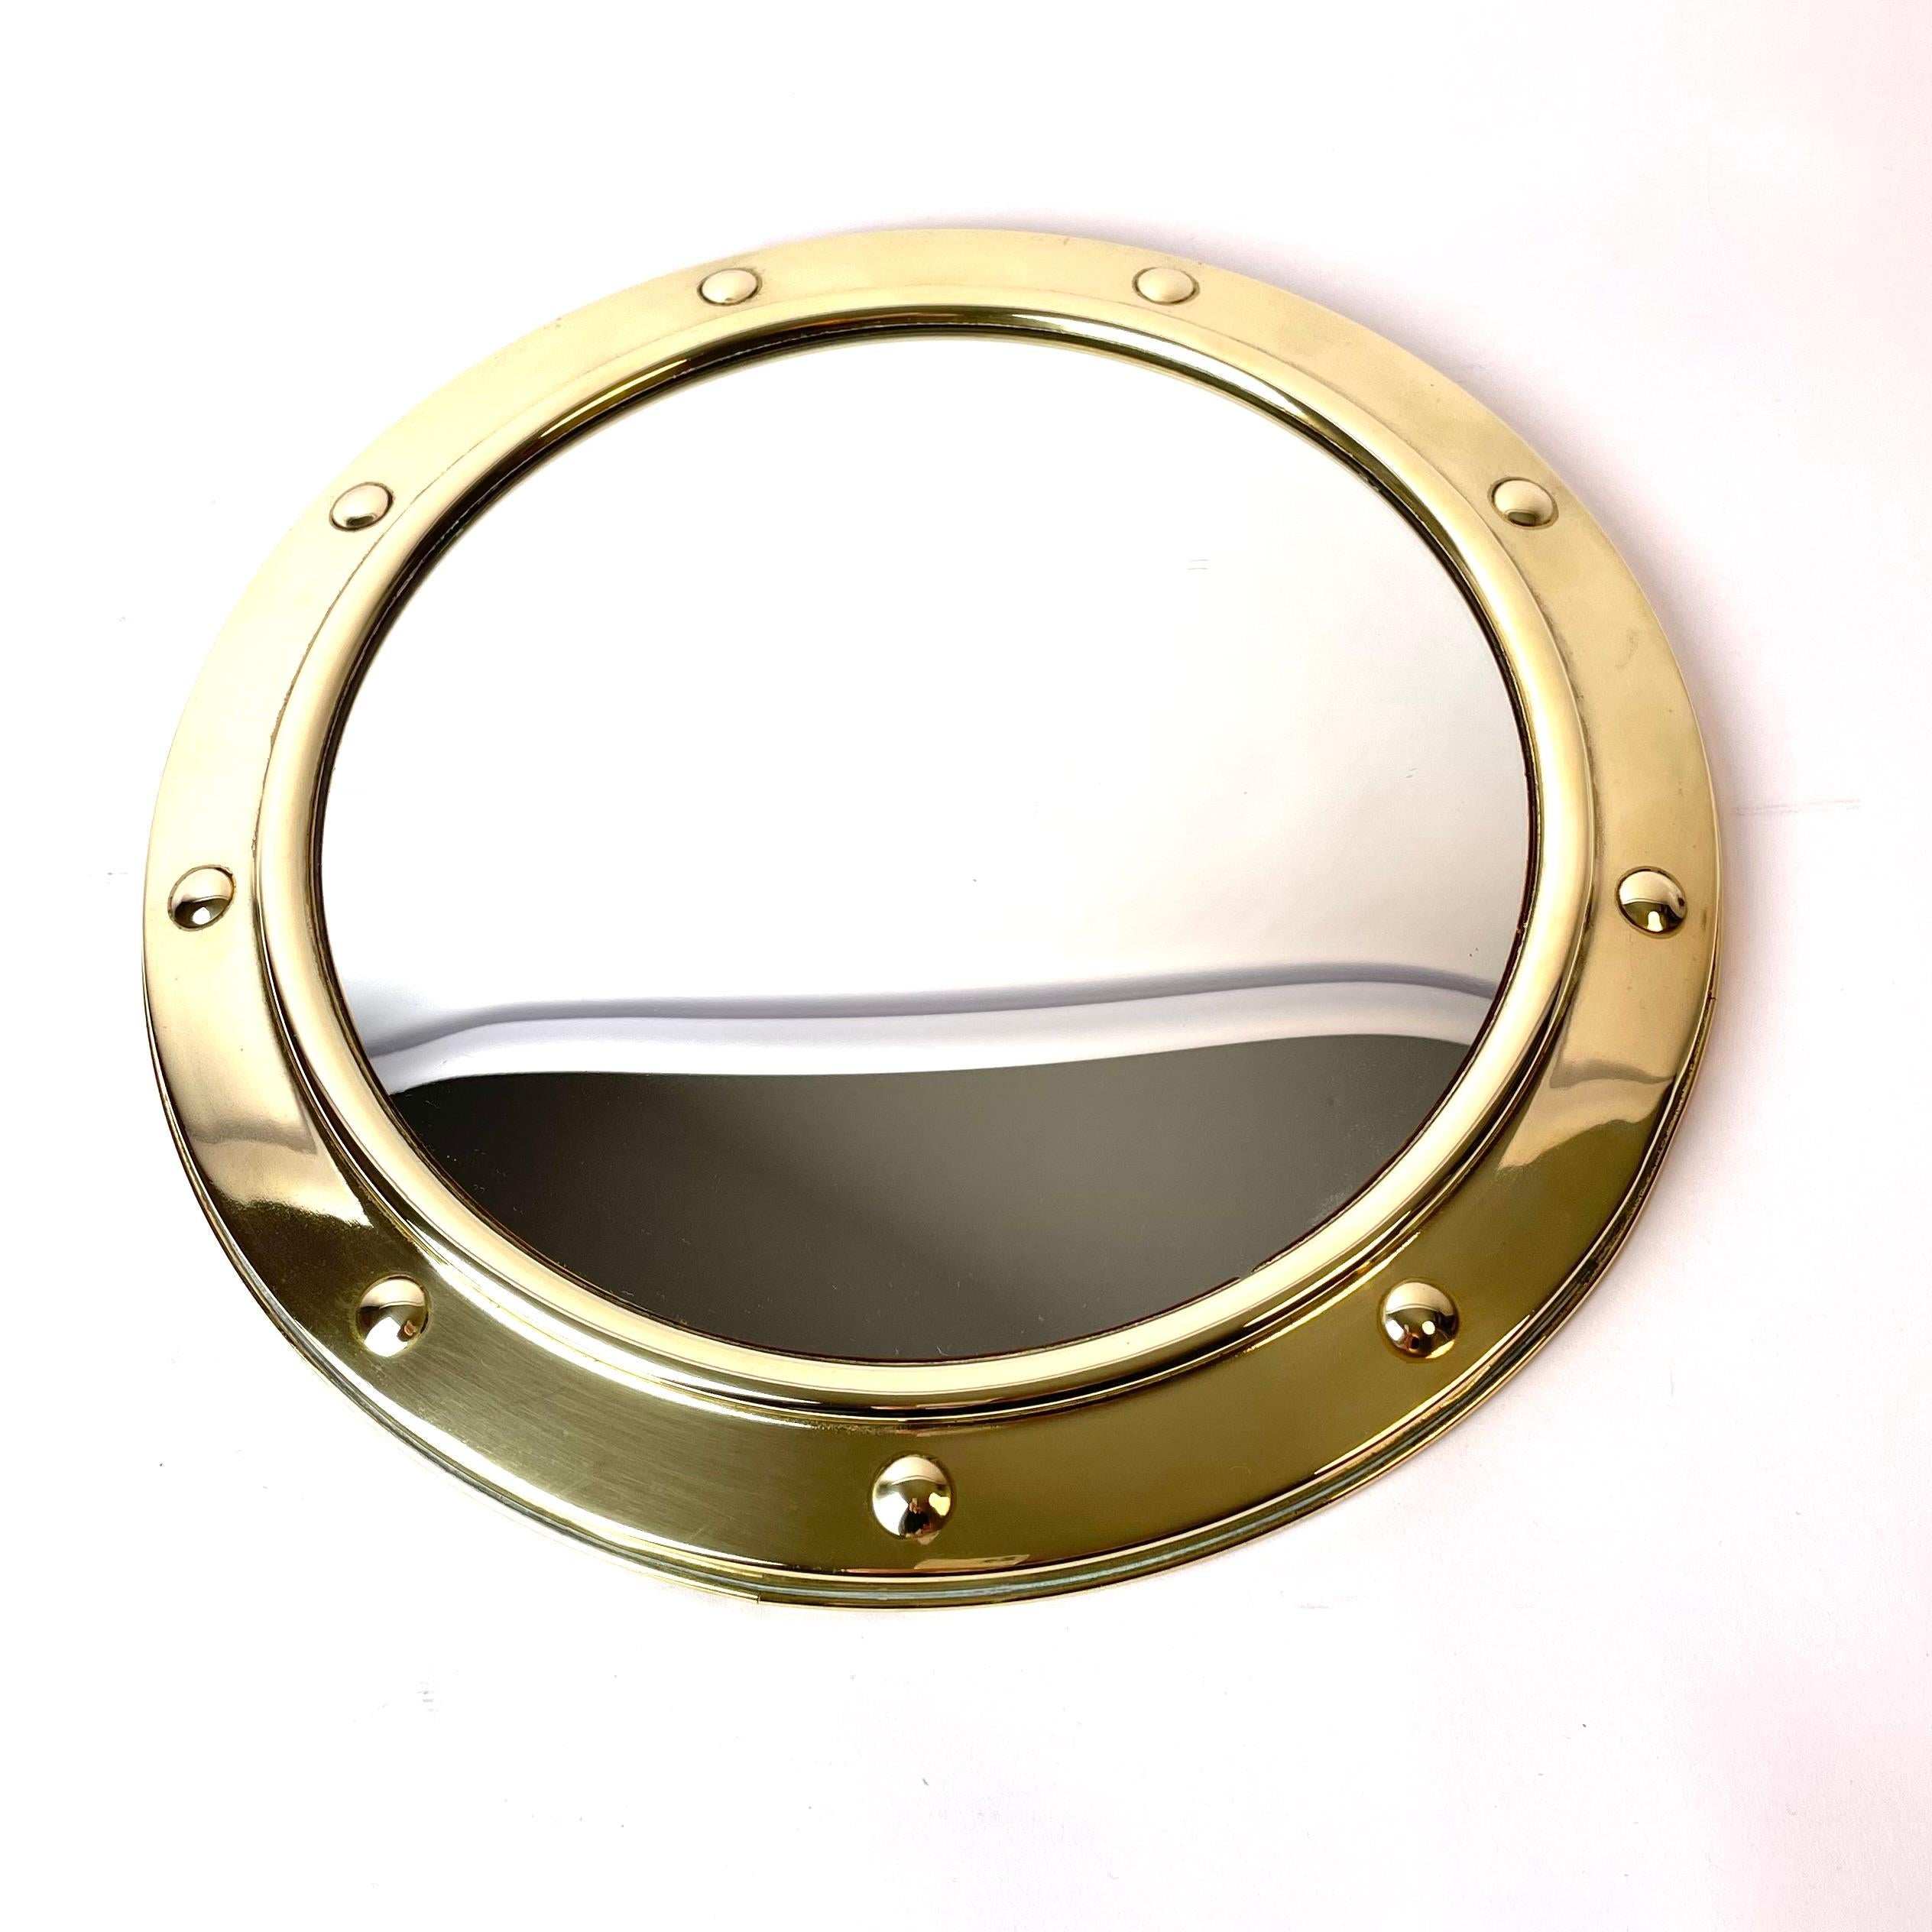 A beautiful mid-20th century porthole convex wall mirror in brass, made by Linton in England, probably in 1940s-1950s.

The mirror is in good condition, but has a small dent on the underside of the mirror (see picture). The dent is not visible when